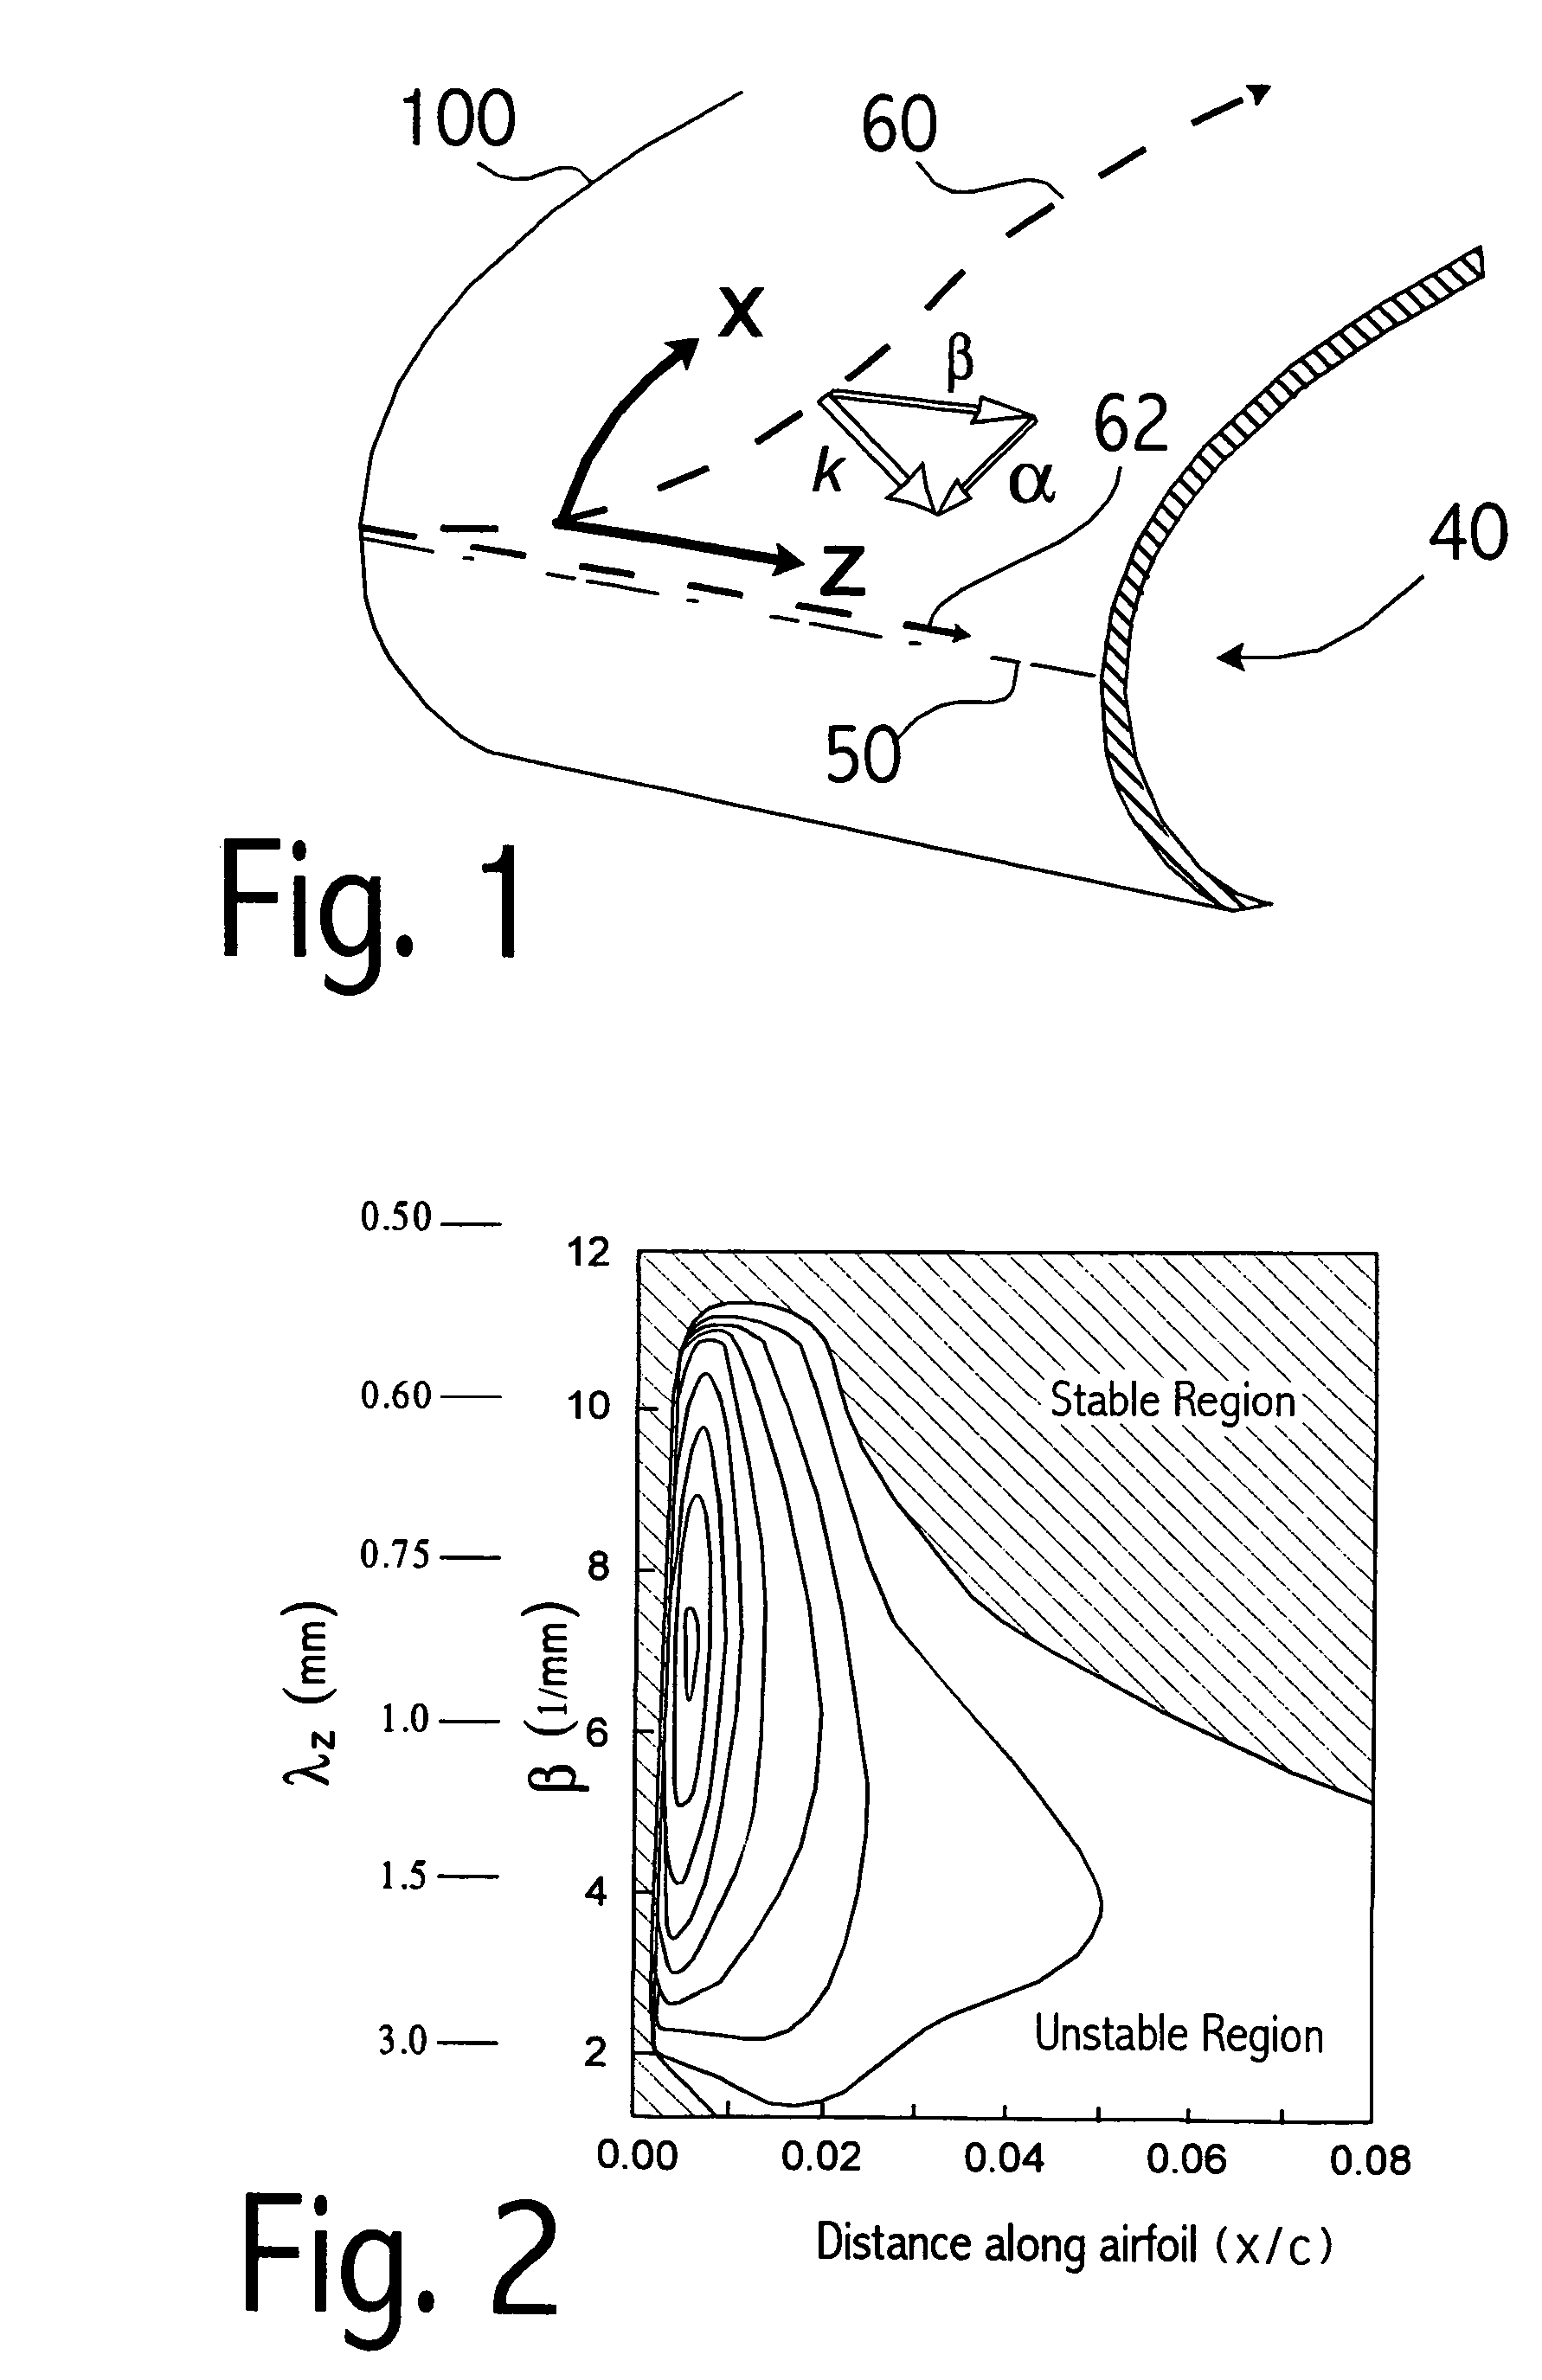 Perforated skin structure for laminar-flow systems